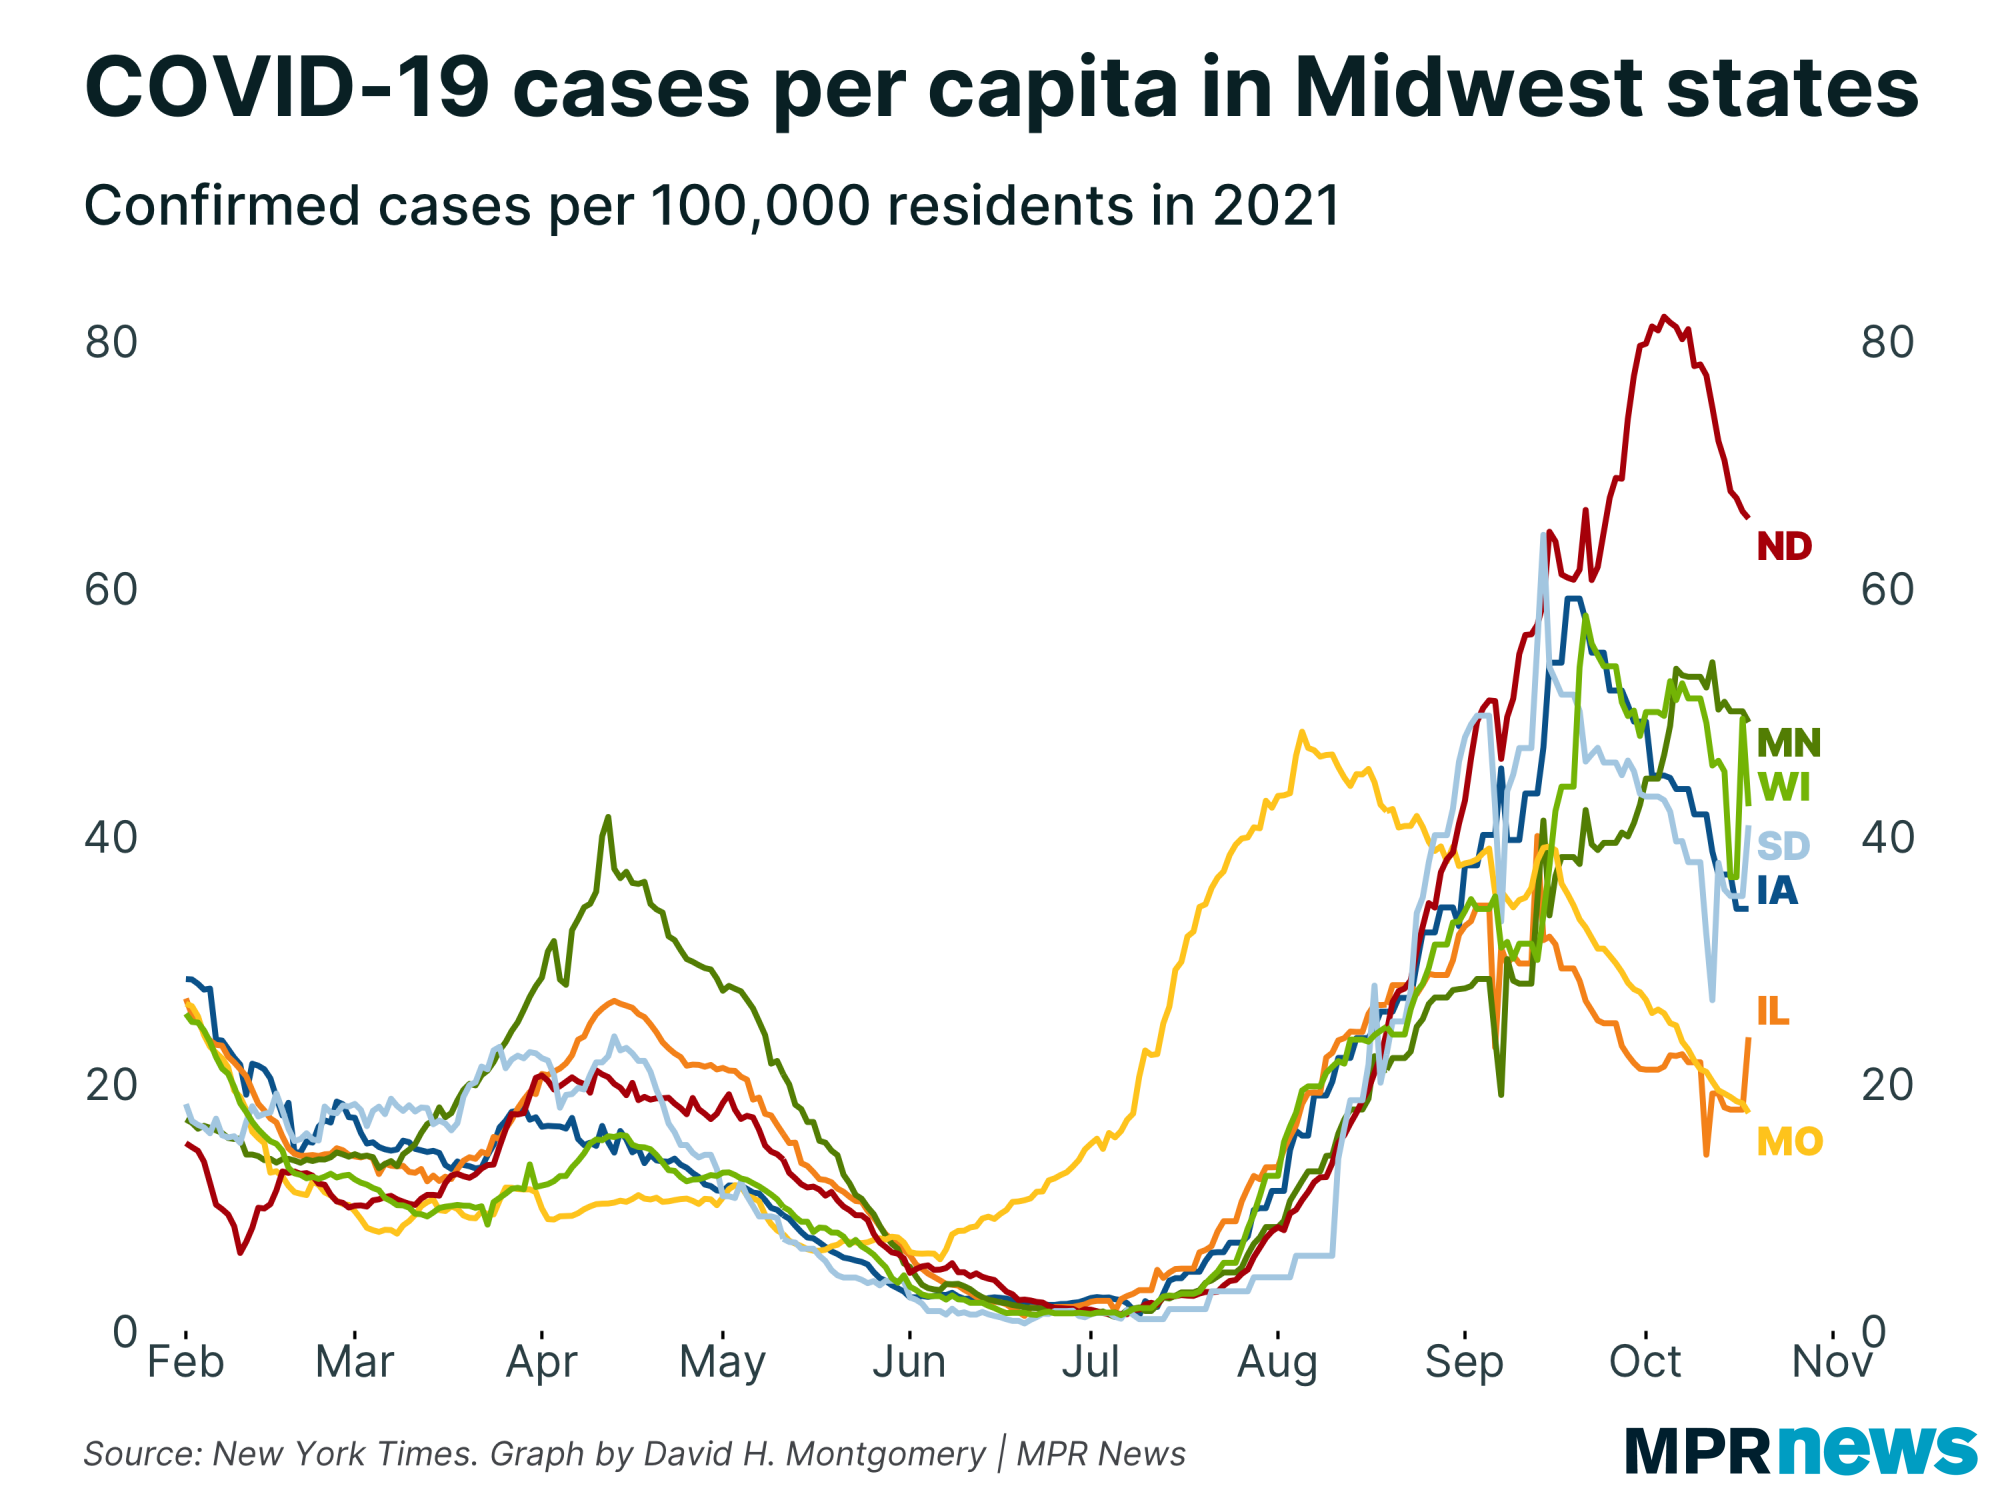 Graph of COVID-19 cases per capita in Midwest states